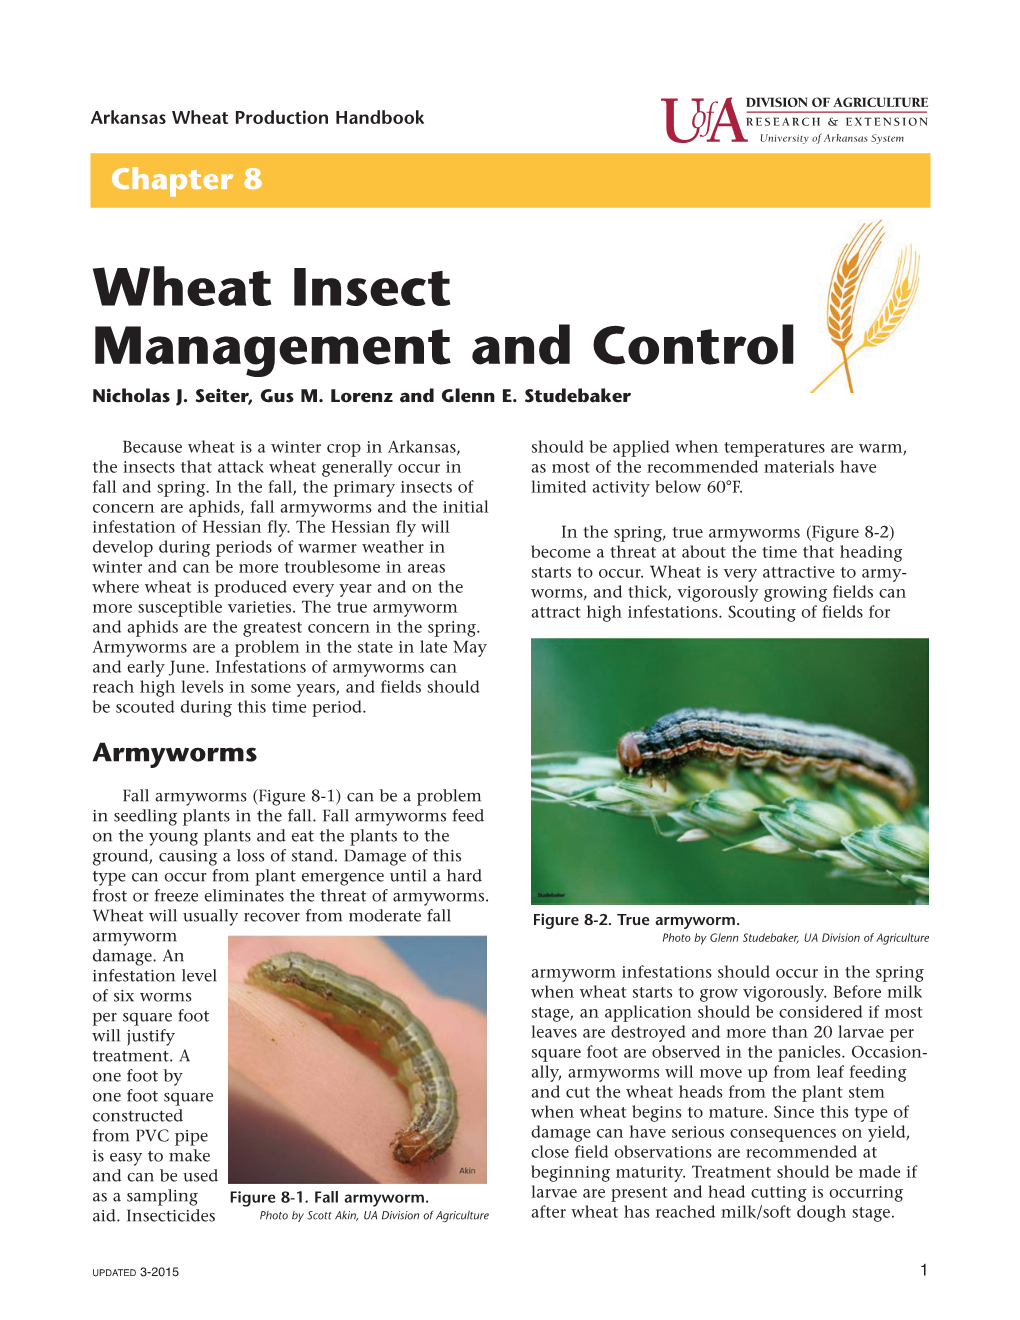 Wheat Insect Management and Control, Chapter 8, MP404